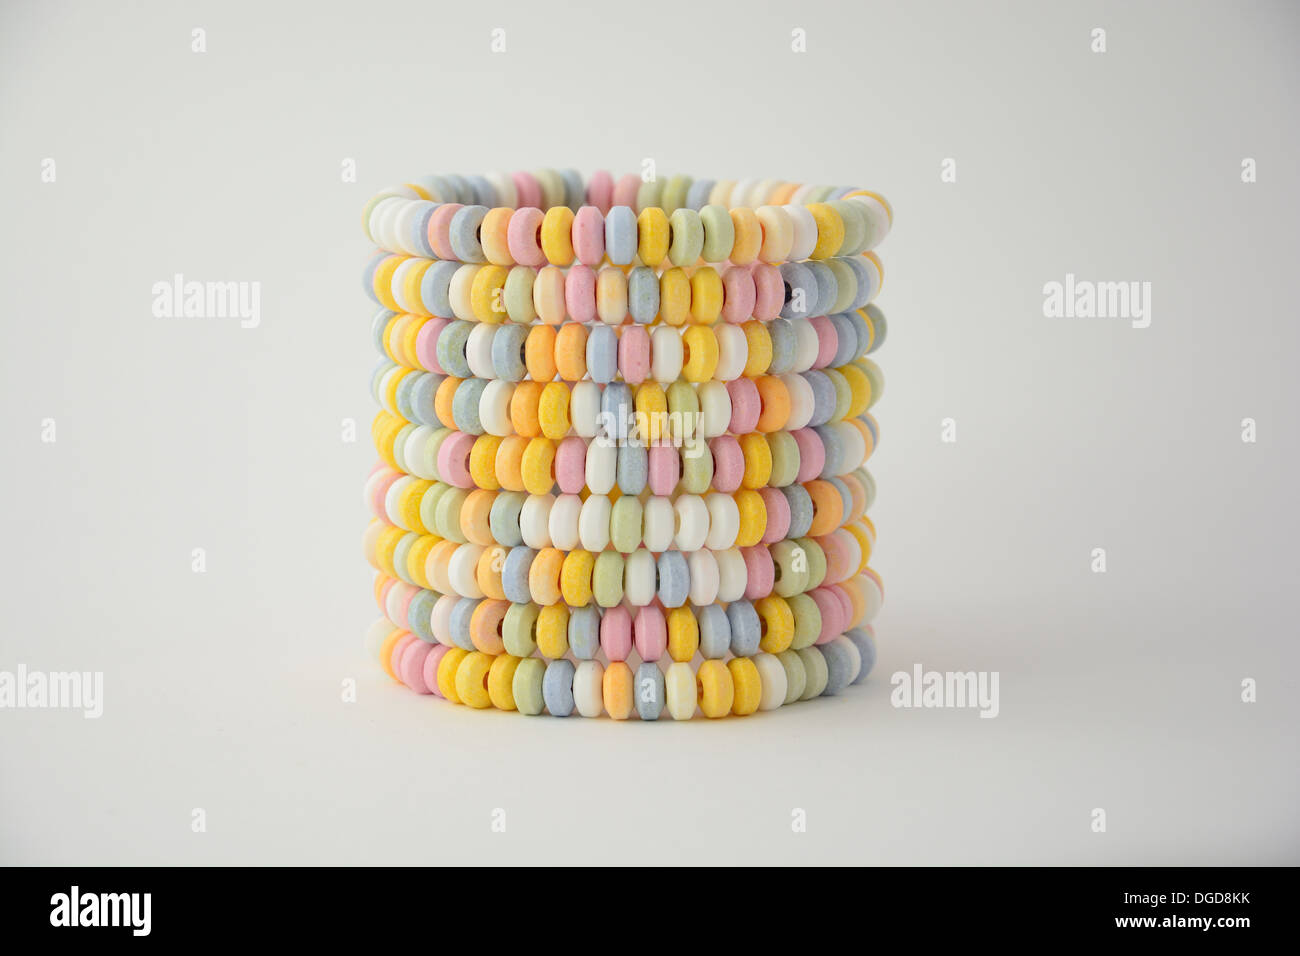 Tower Made From Candy Necklaces Isolated On White Studio Background Stock Photo